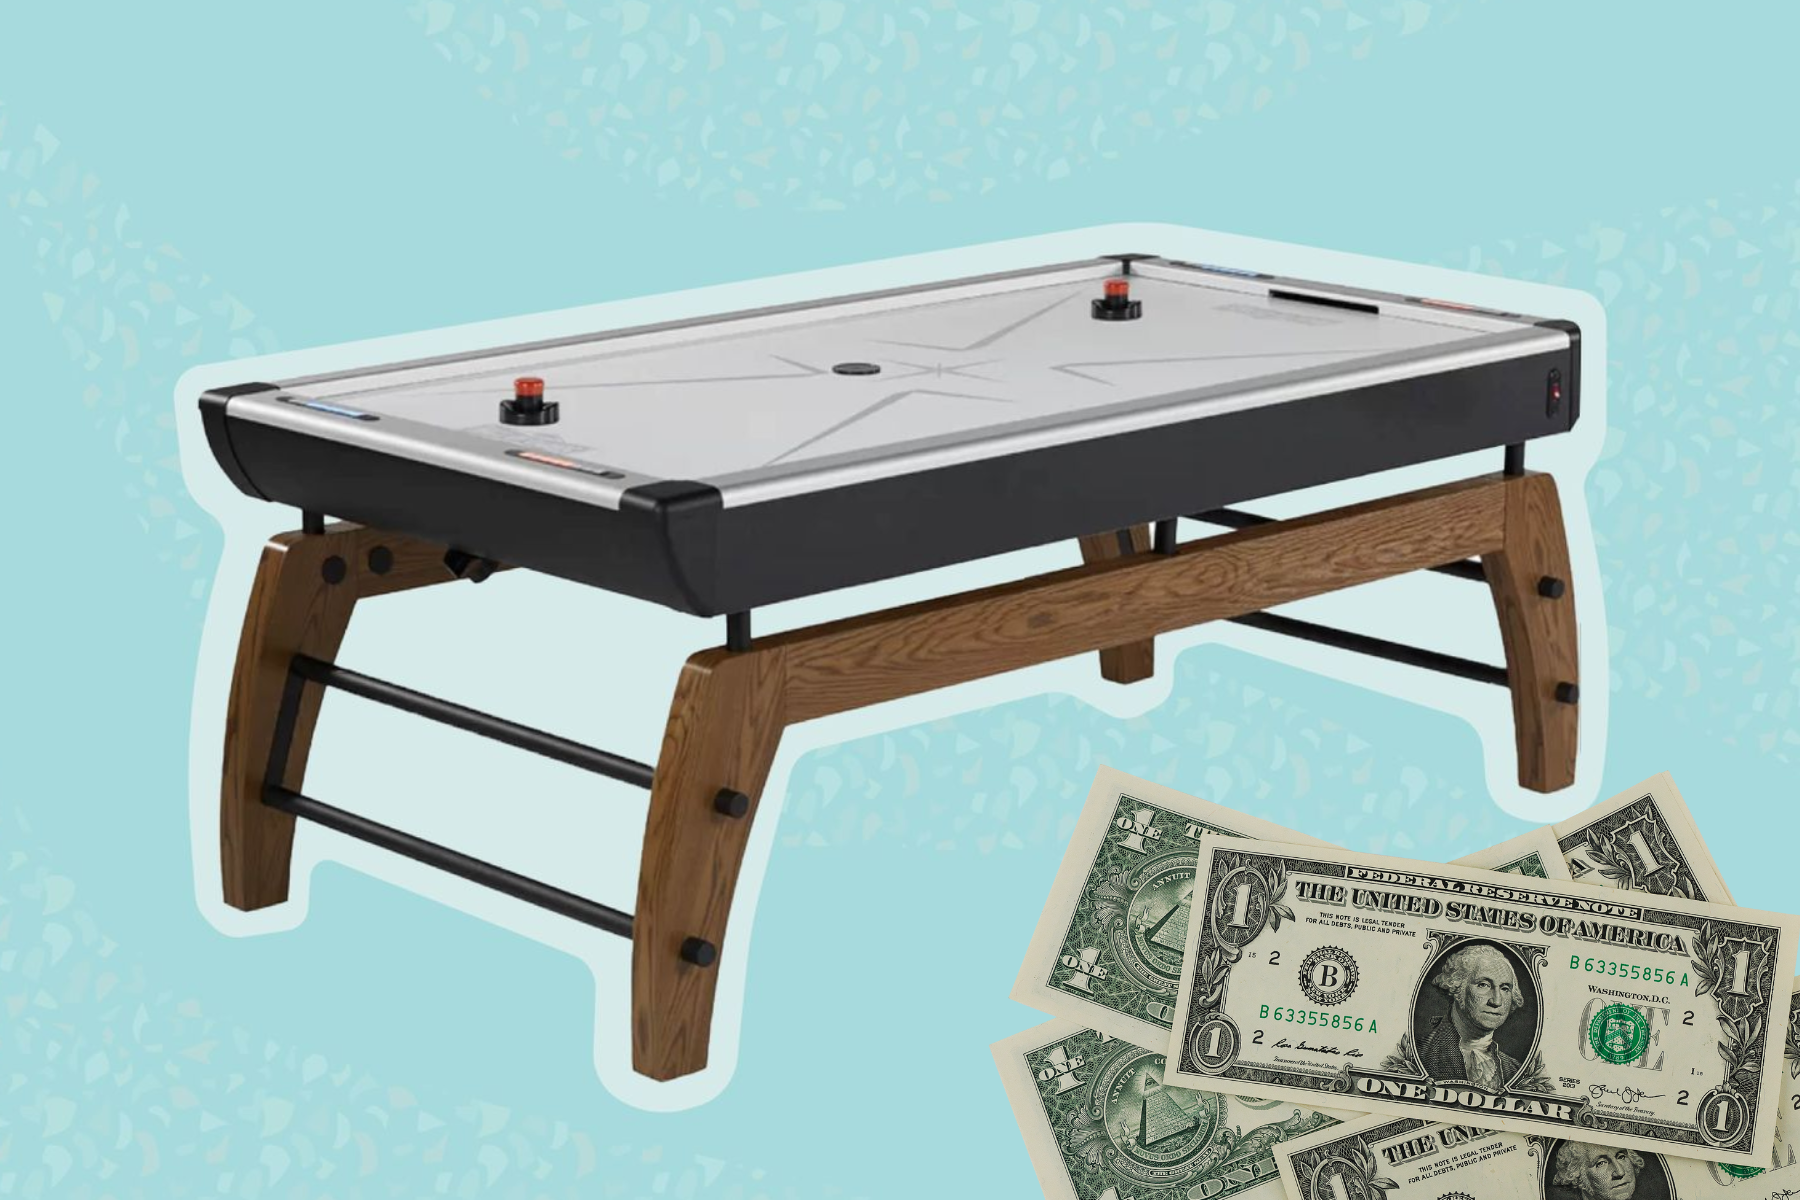 An air hockey table in the background with scattered dollar bills